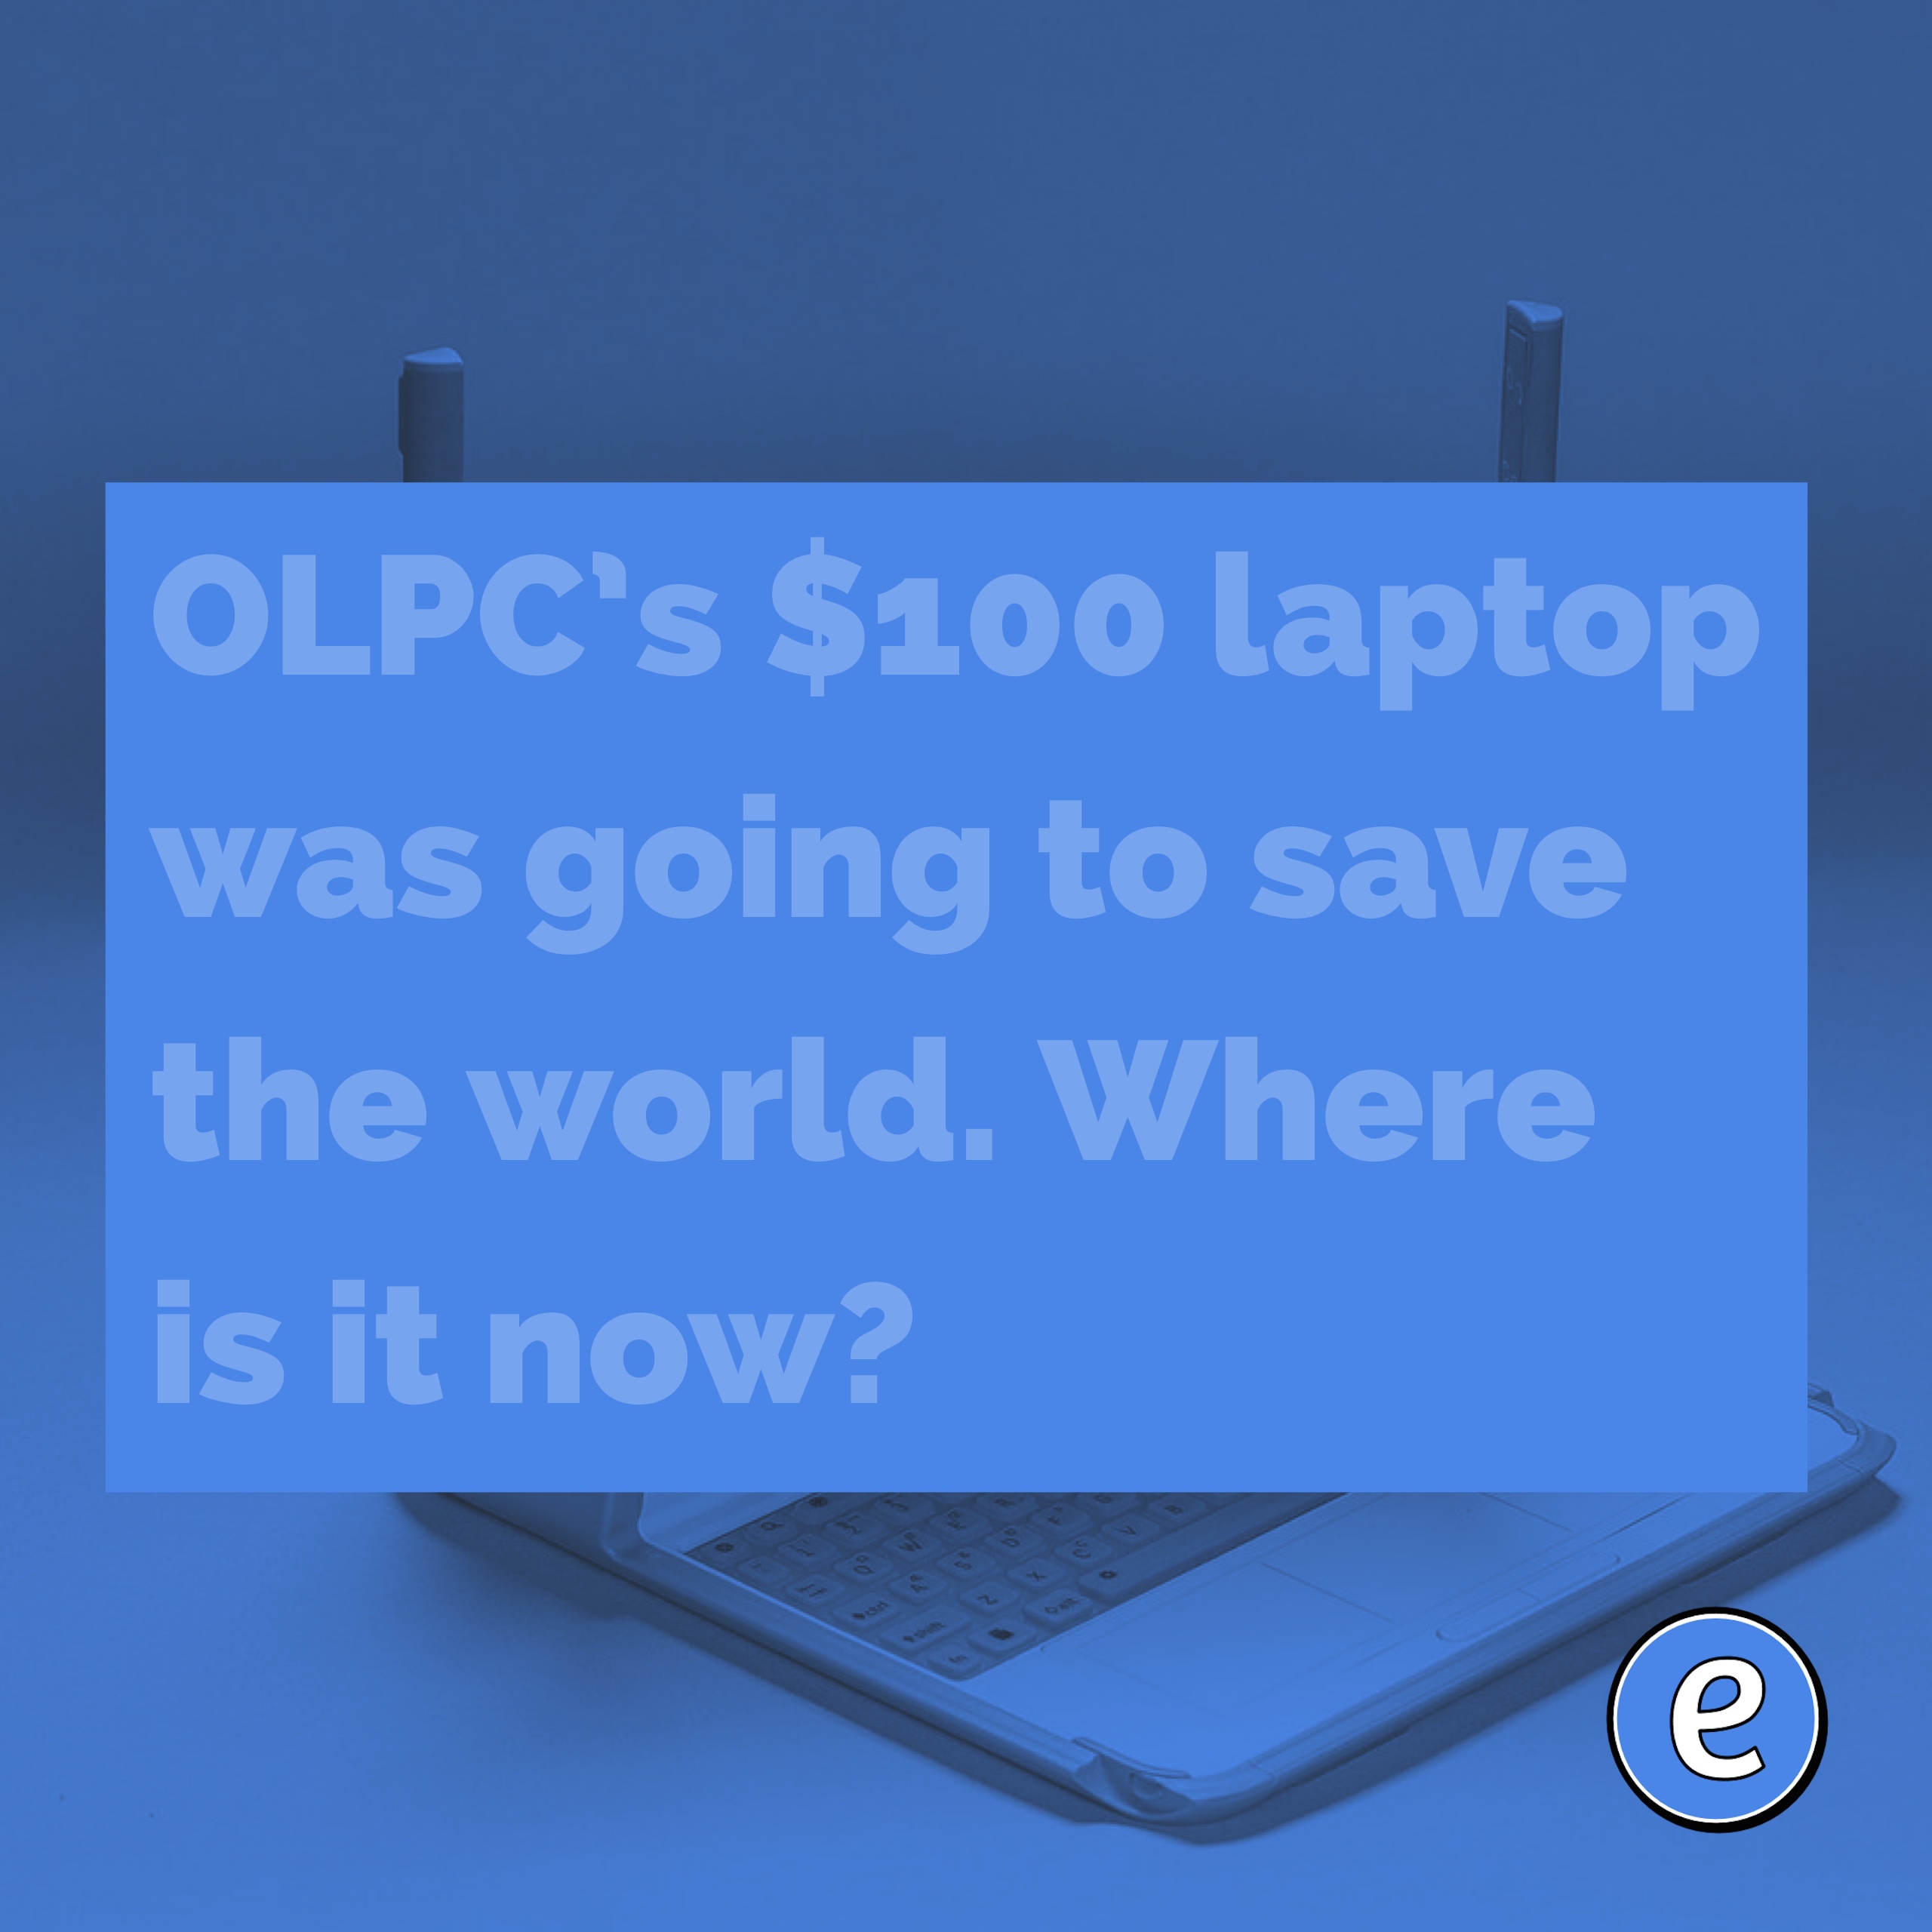 OLPC’s $100 laptop was going to save the world. Where is it now?